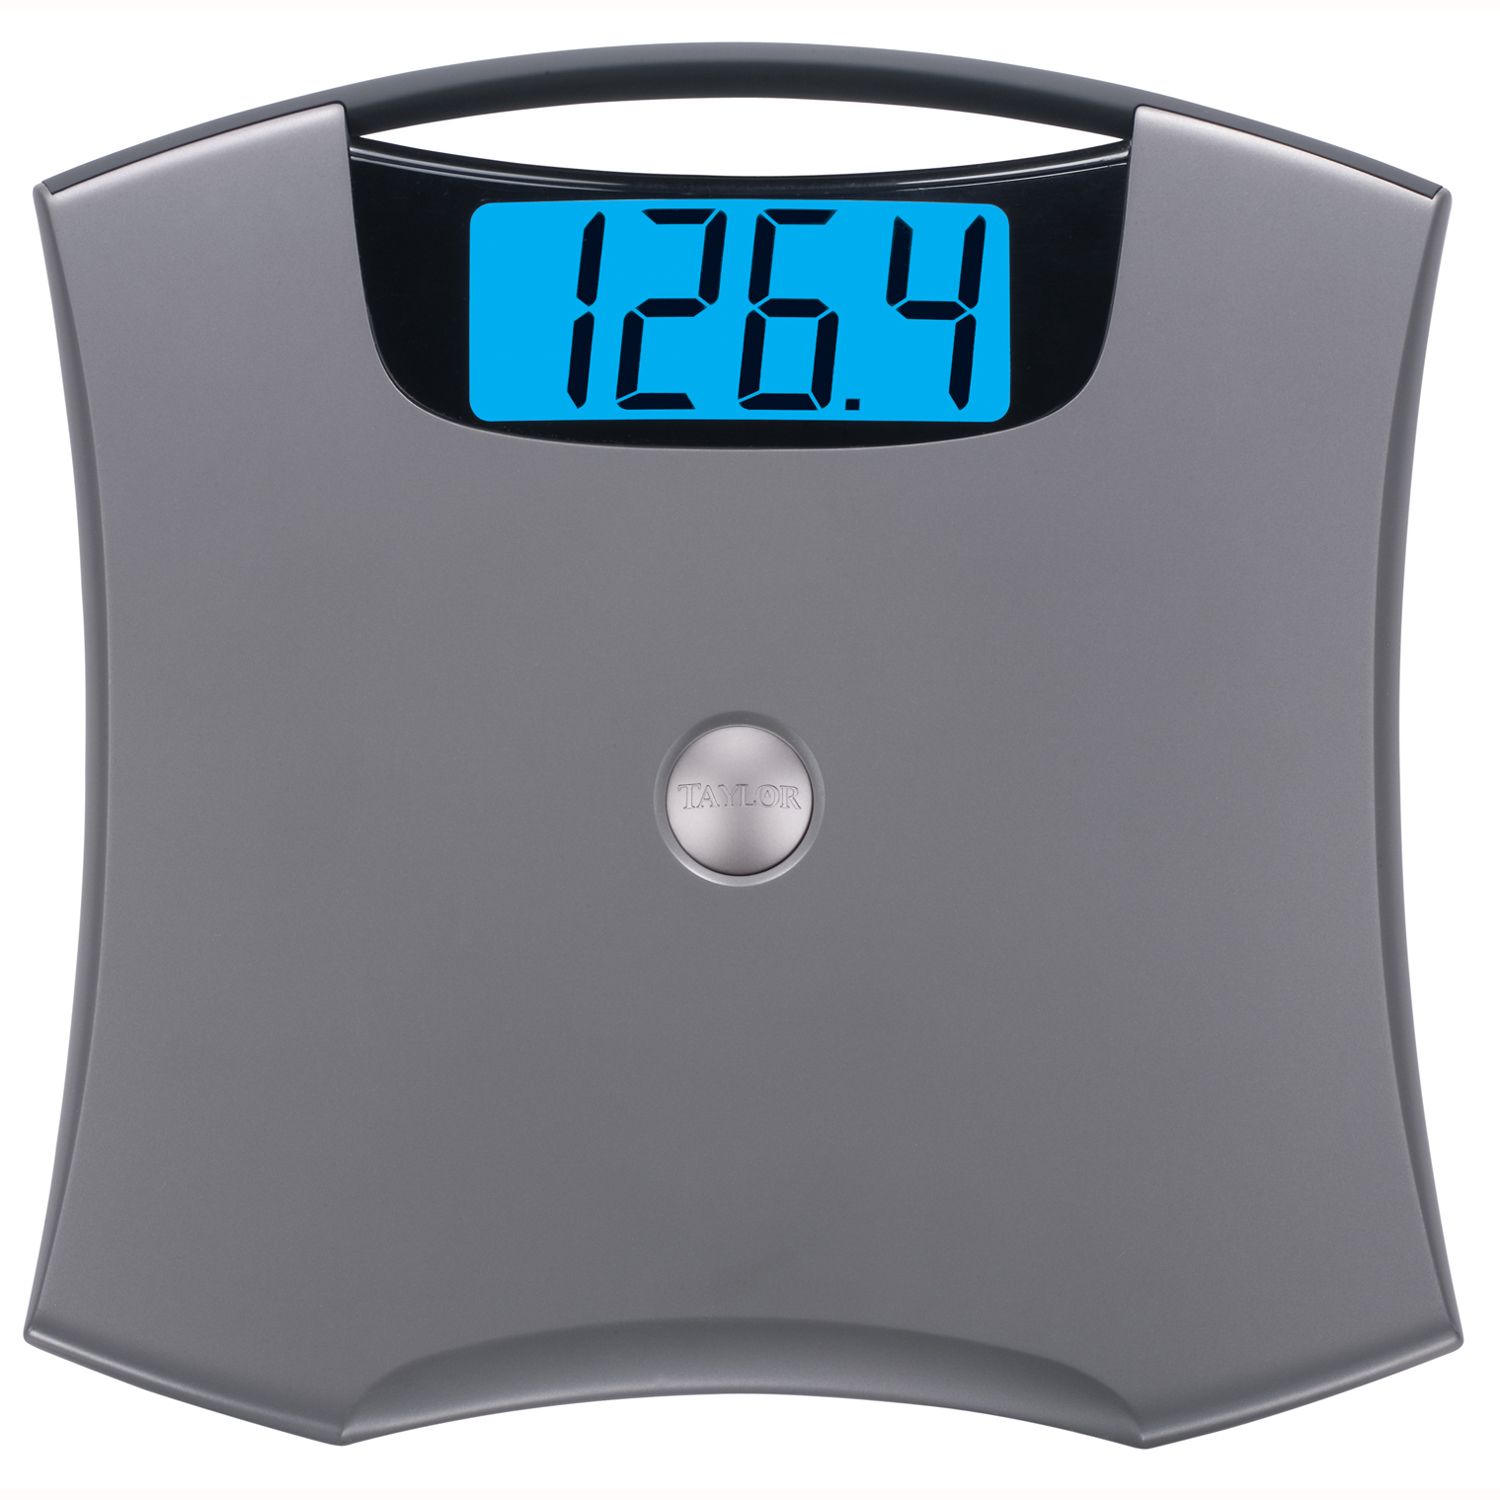 Taylor Scales Nickel Accented Lithium Scale with 2" LCD Readout